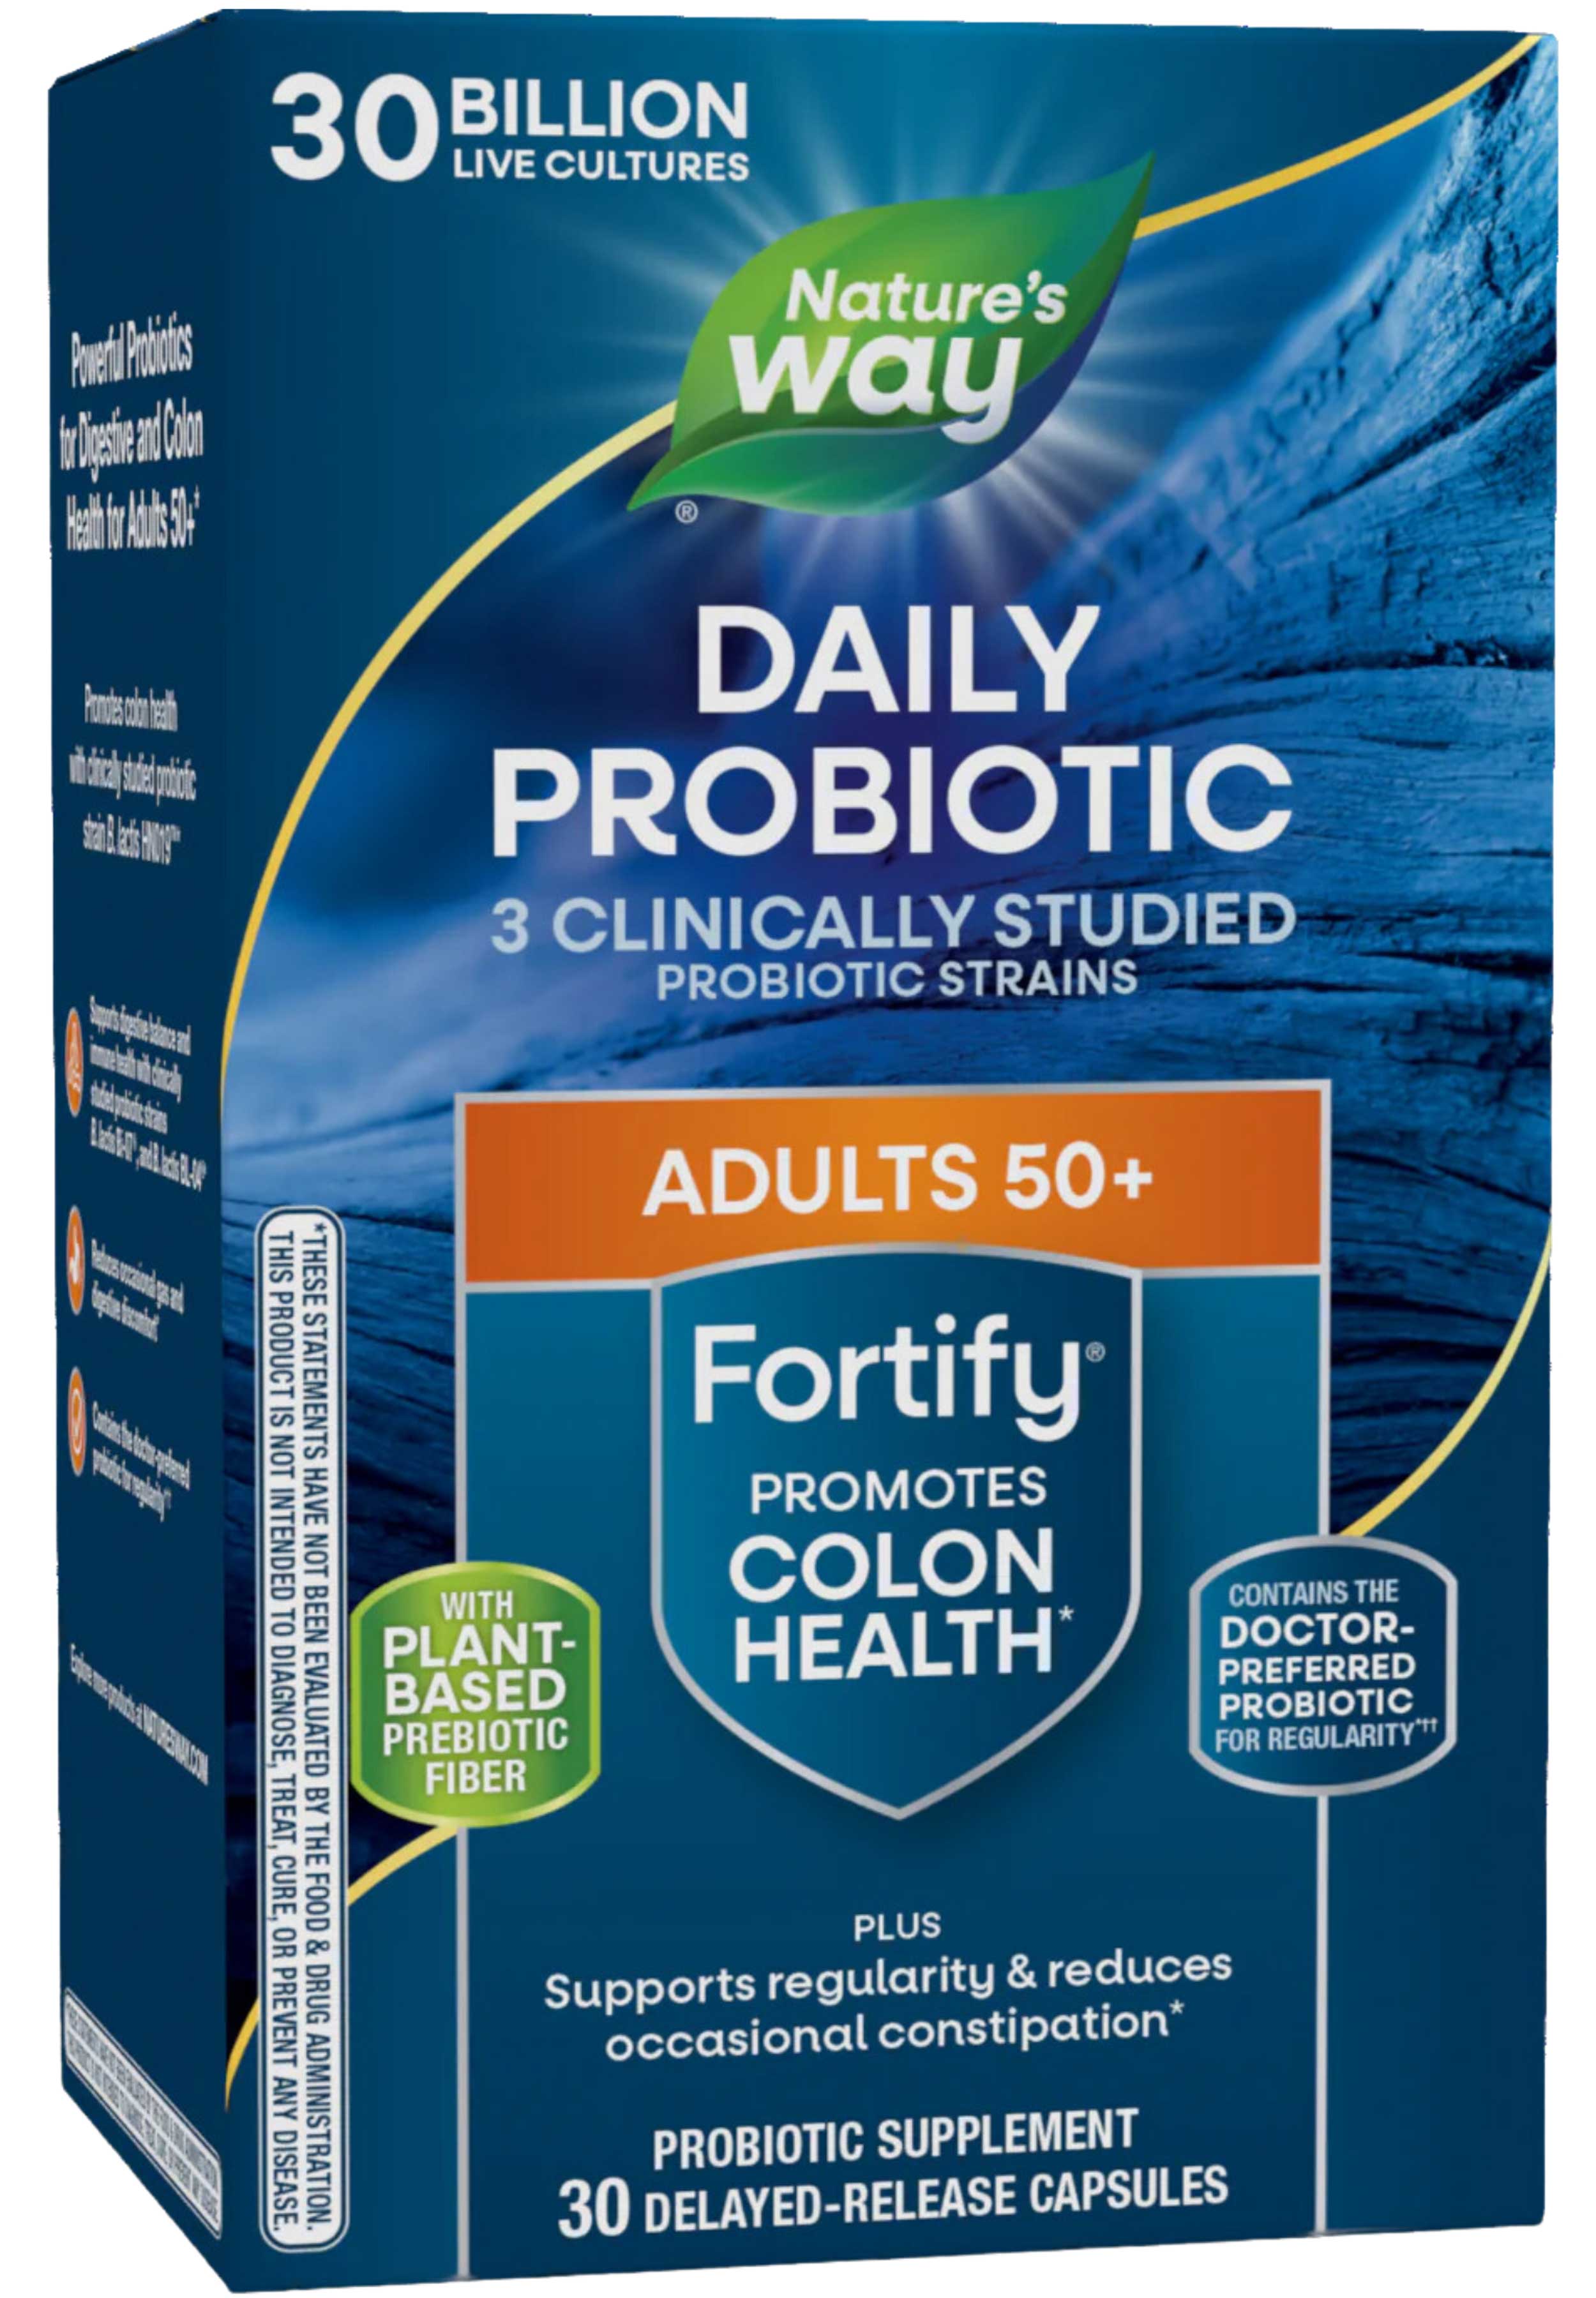 Nature's Way Fortify 50+ Probiotic 30 Billion